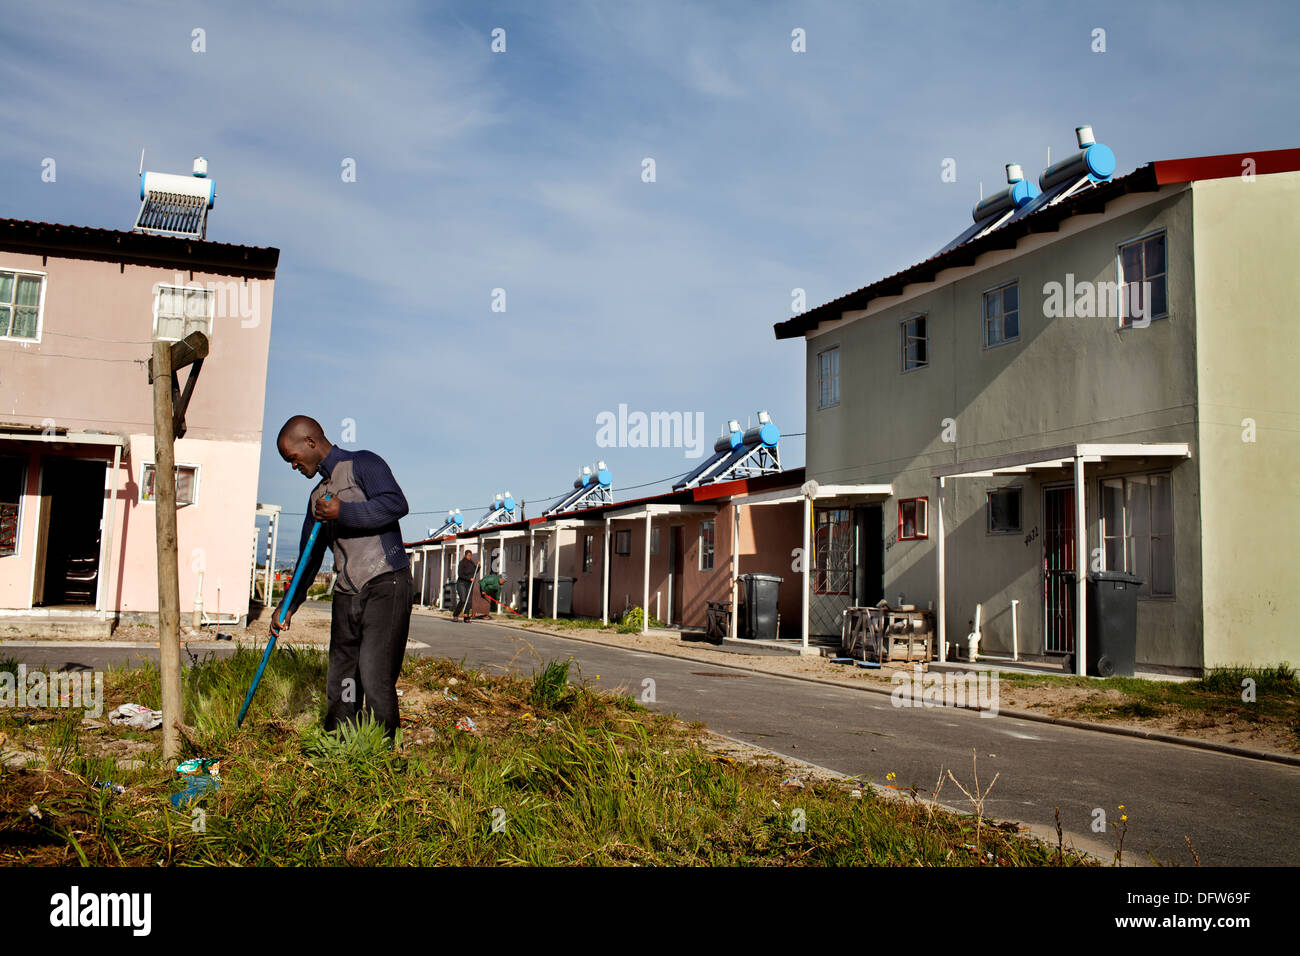 Cape Town South Africa - A man rakes a grassy patch in street a newly developed RDP housing project in Langa where all houses Stock Photo